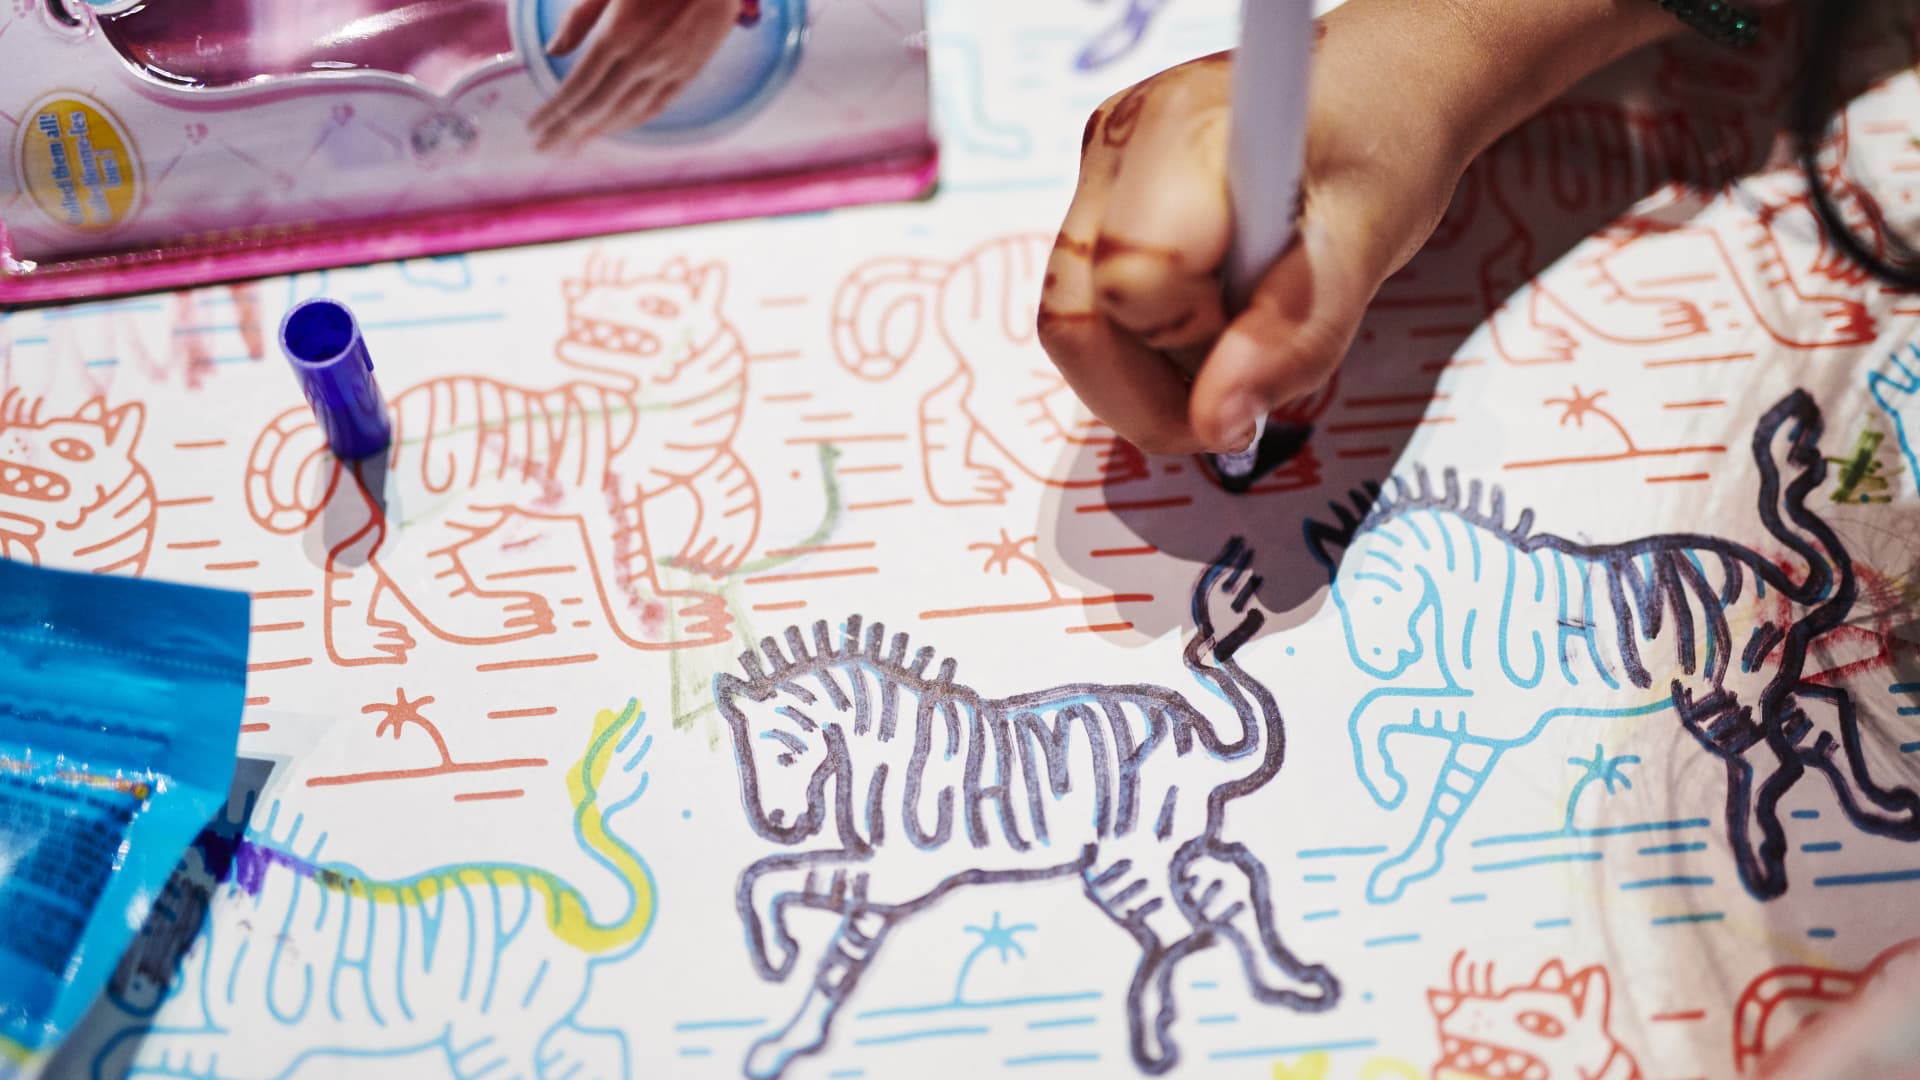 A child draws with markers on a pad at the Camp retail location in New York, June 4, 2019.